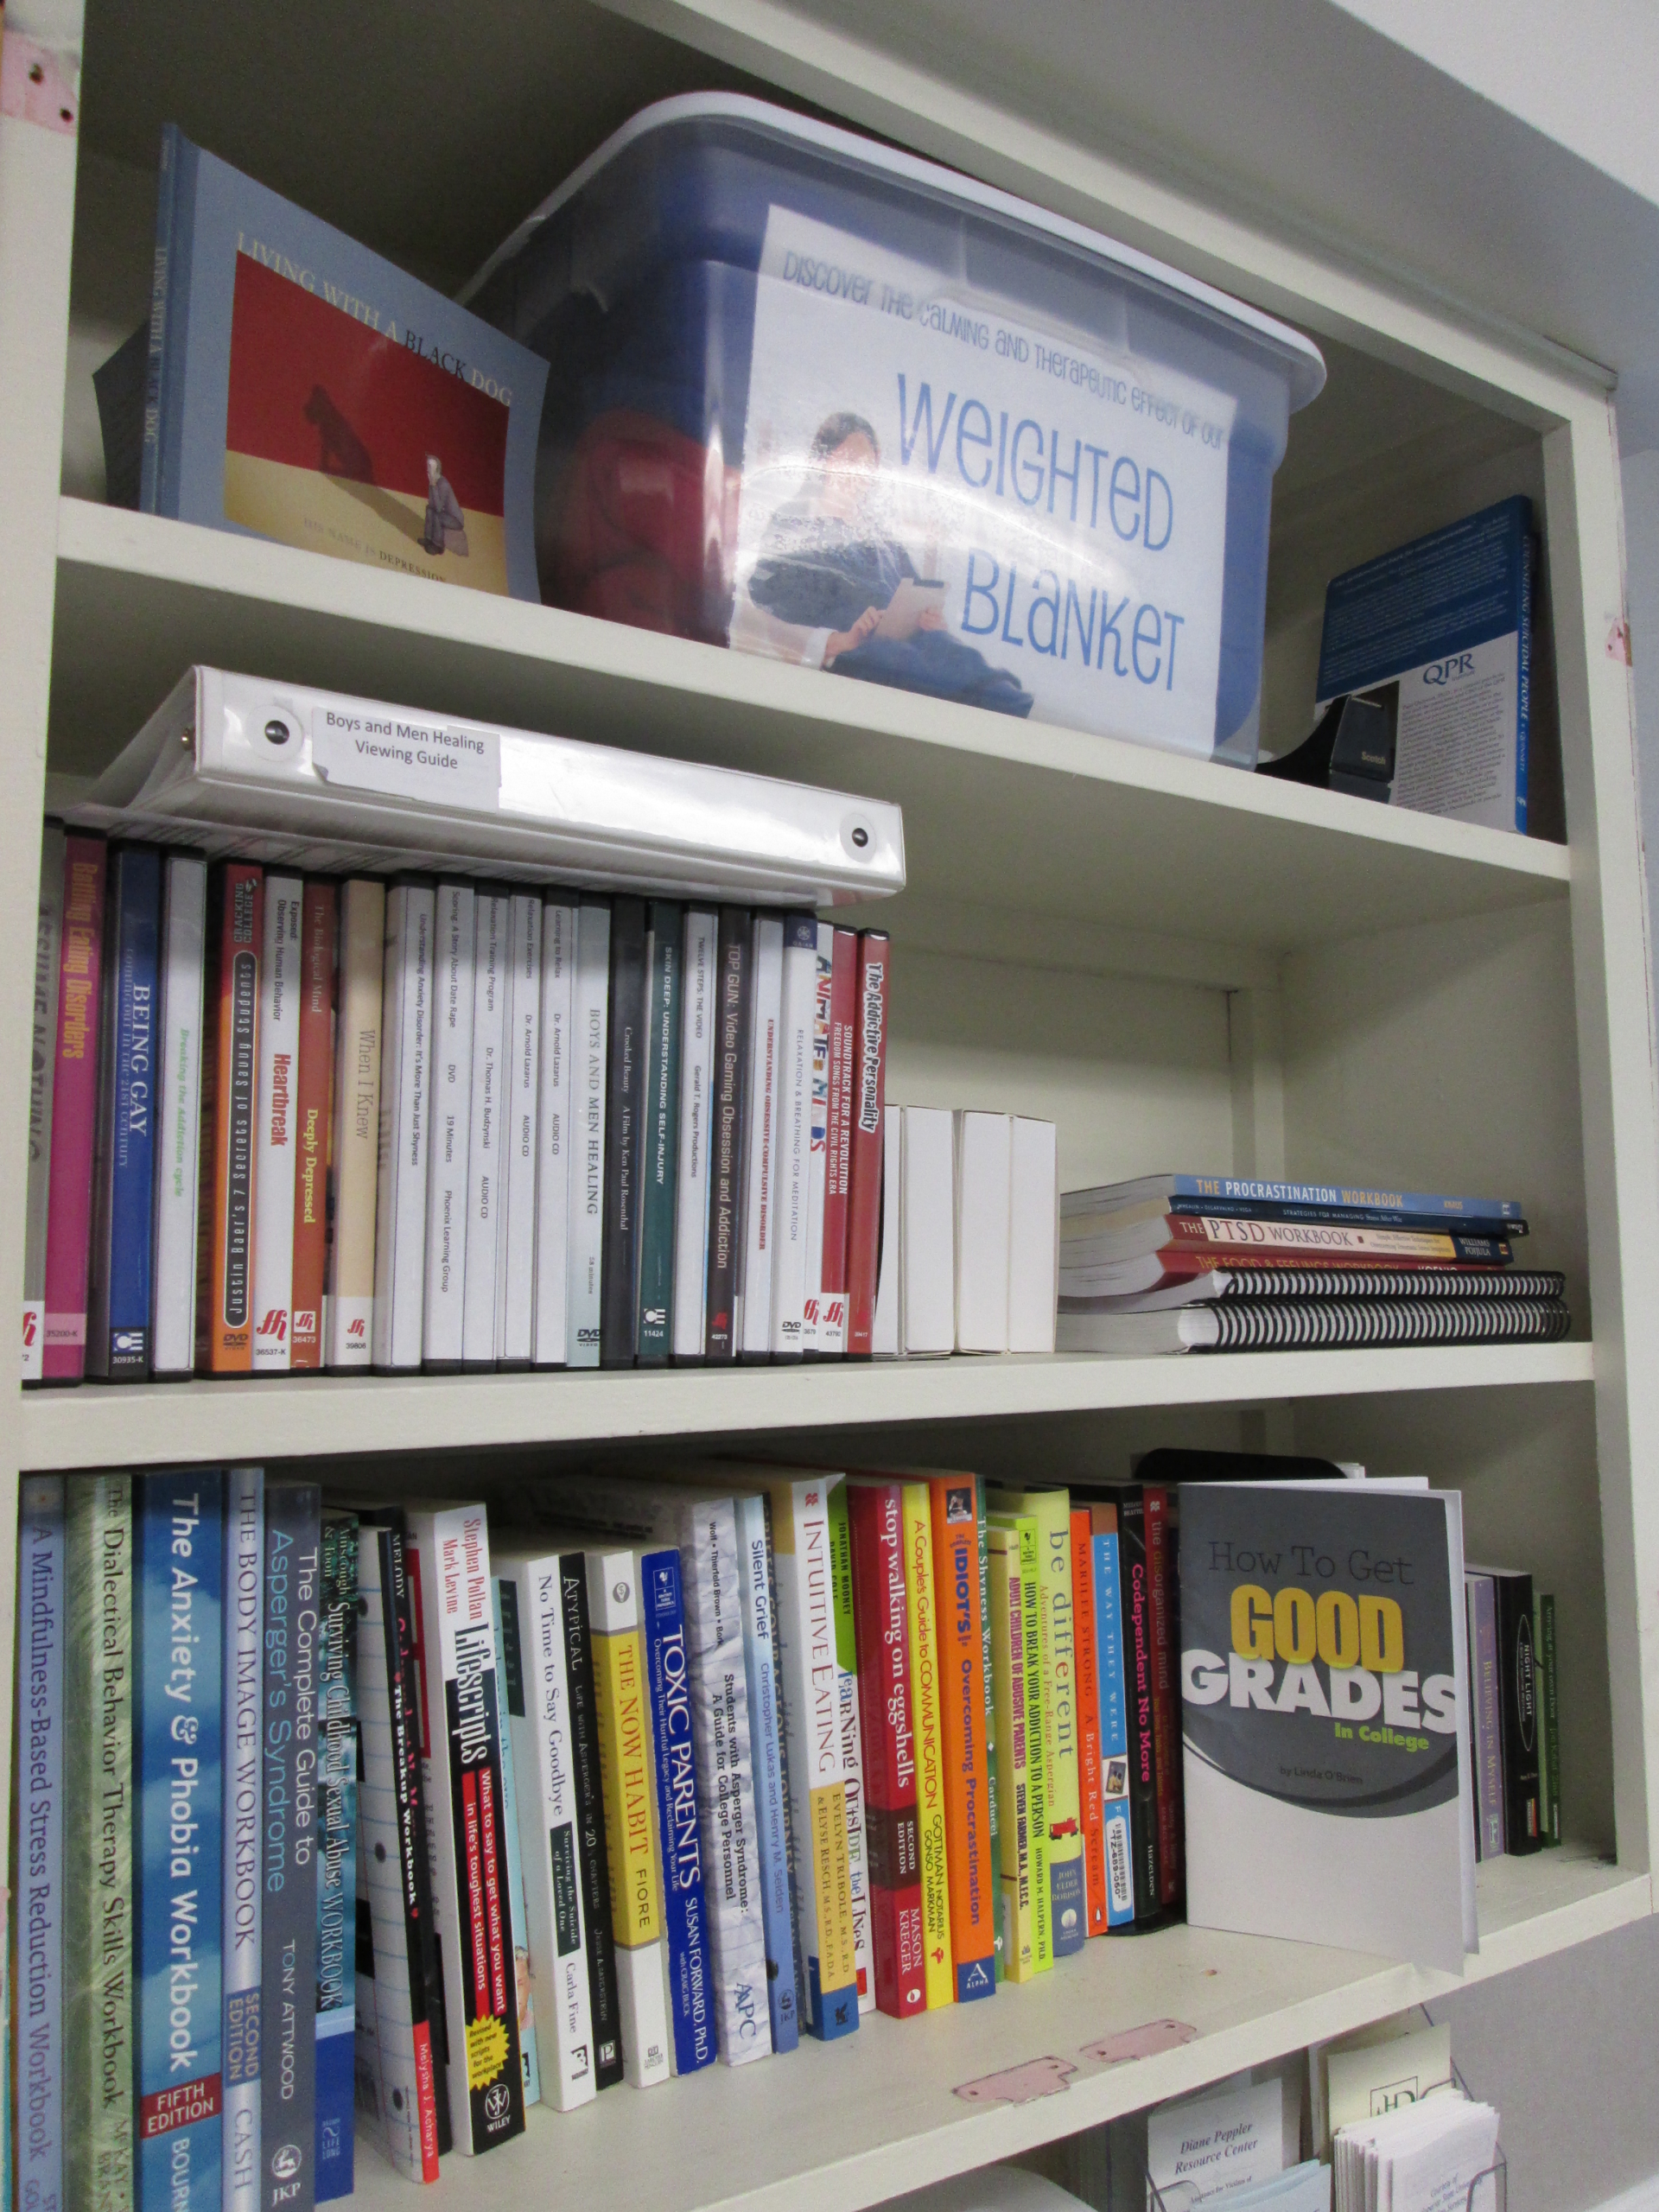 Counseling Services has a variety of mental health related books and DVD's that students can check out free of cost.